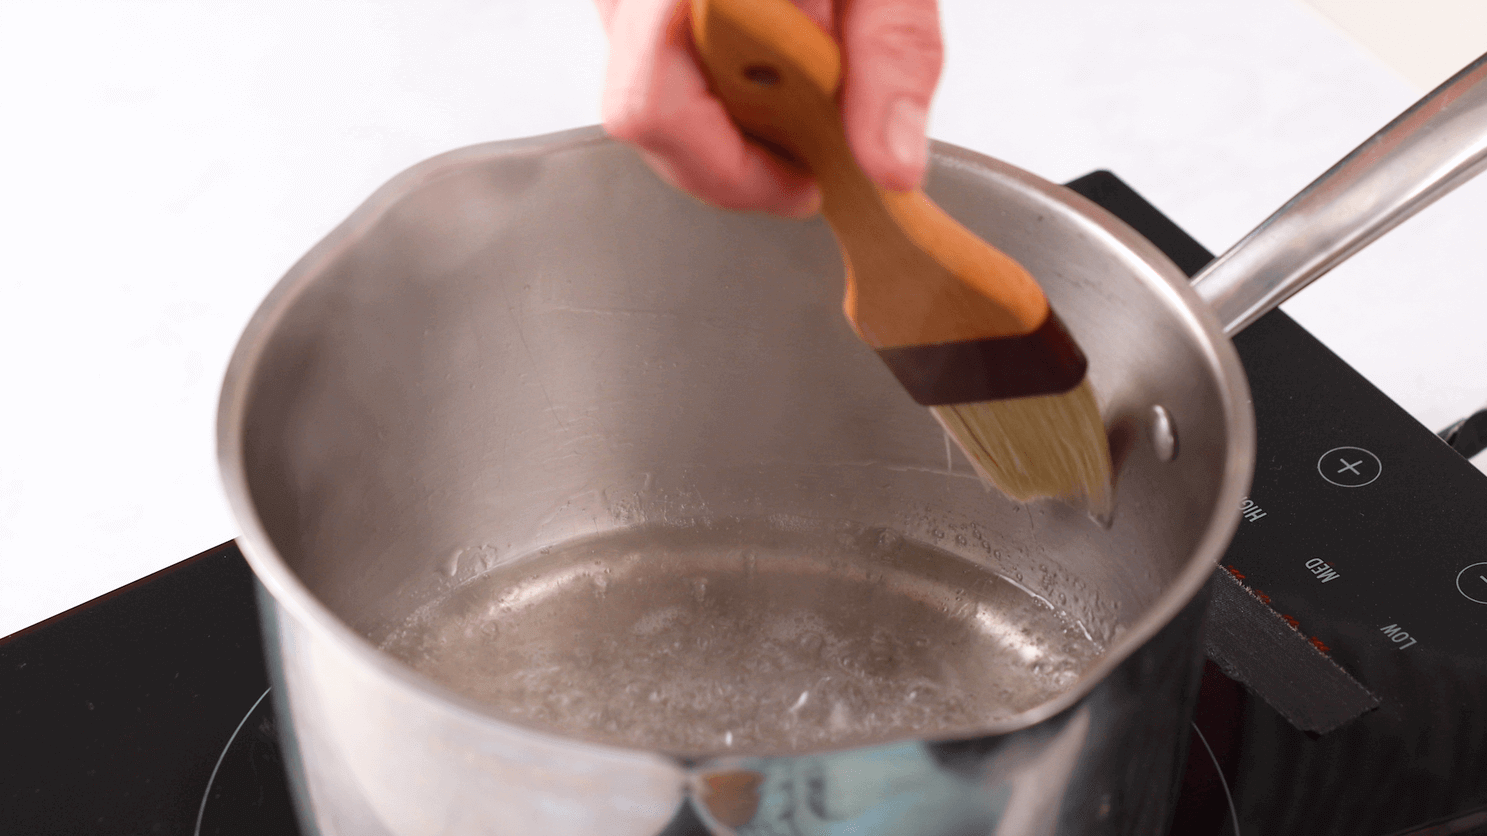 How to caramelize sugar with nielsen-massey